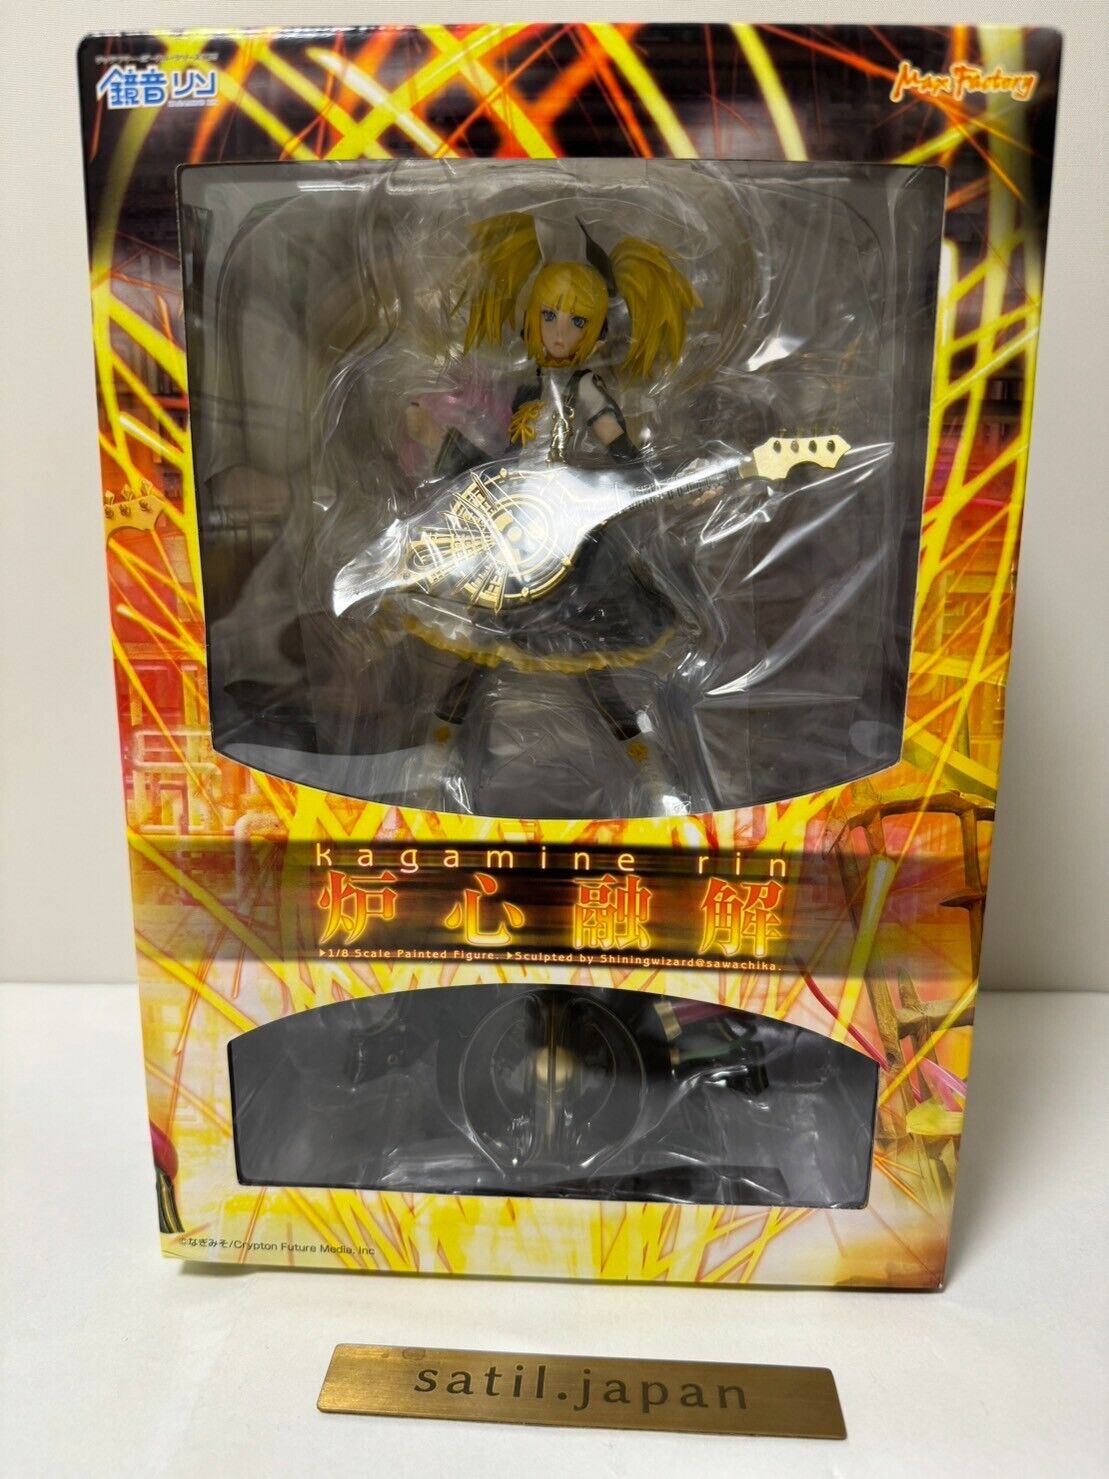 [USED] Max Factory Rin Kagamine Figure Vocaloid Meltdown 1/8 Scale Japan 2010